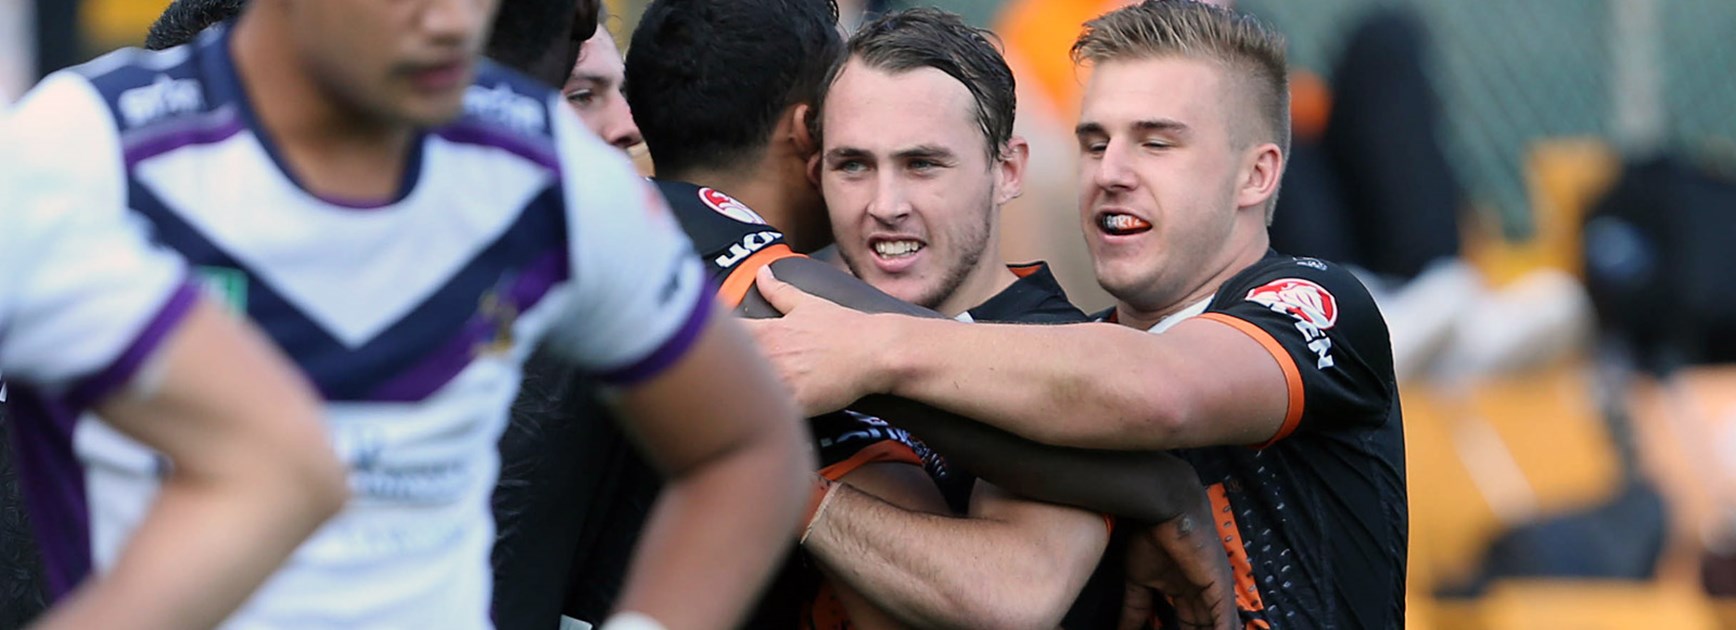 Wests Tigers' NYC side enjoyed a big win over the Storm in Round 7.